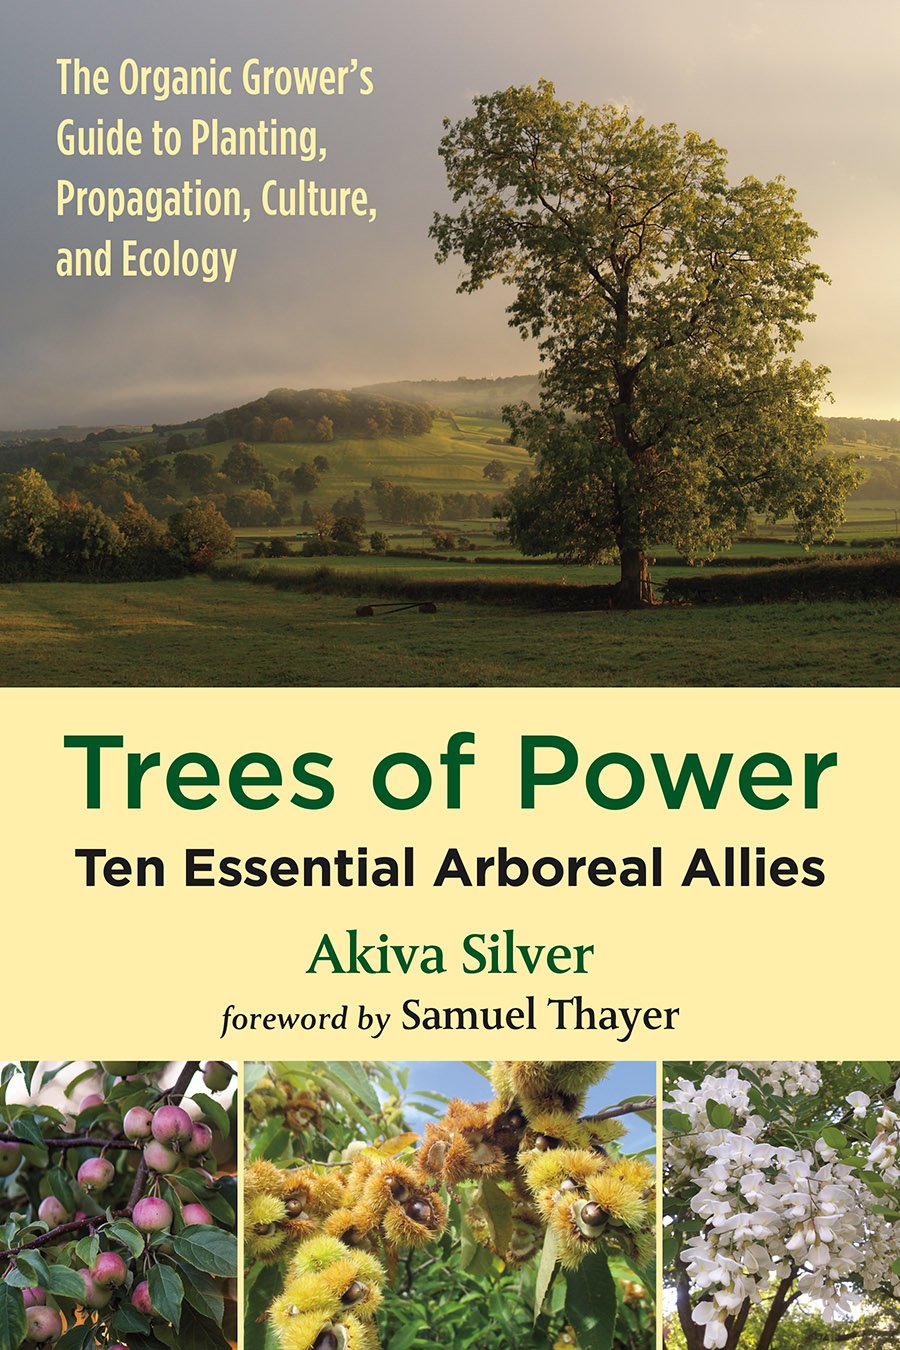 The Trees of Power cover